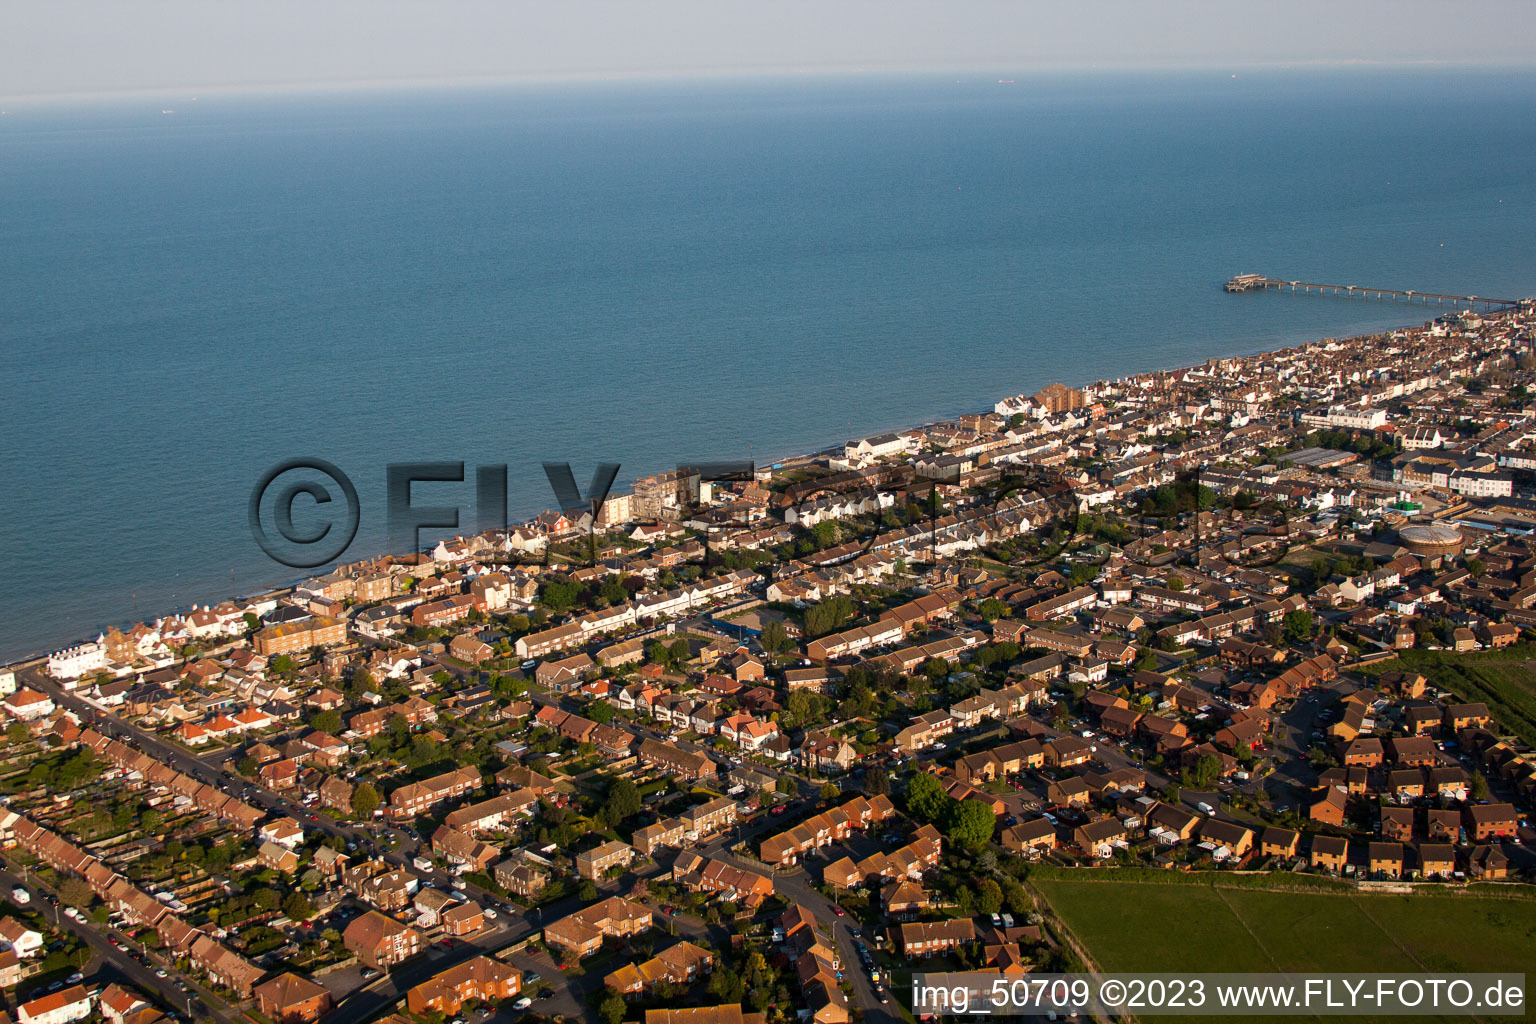 Deal in the state England, Great Britain seen from above